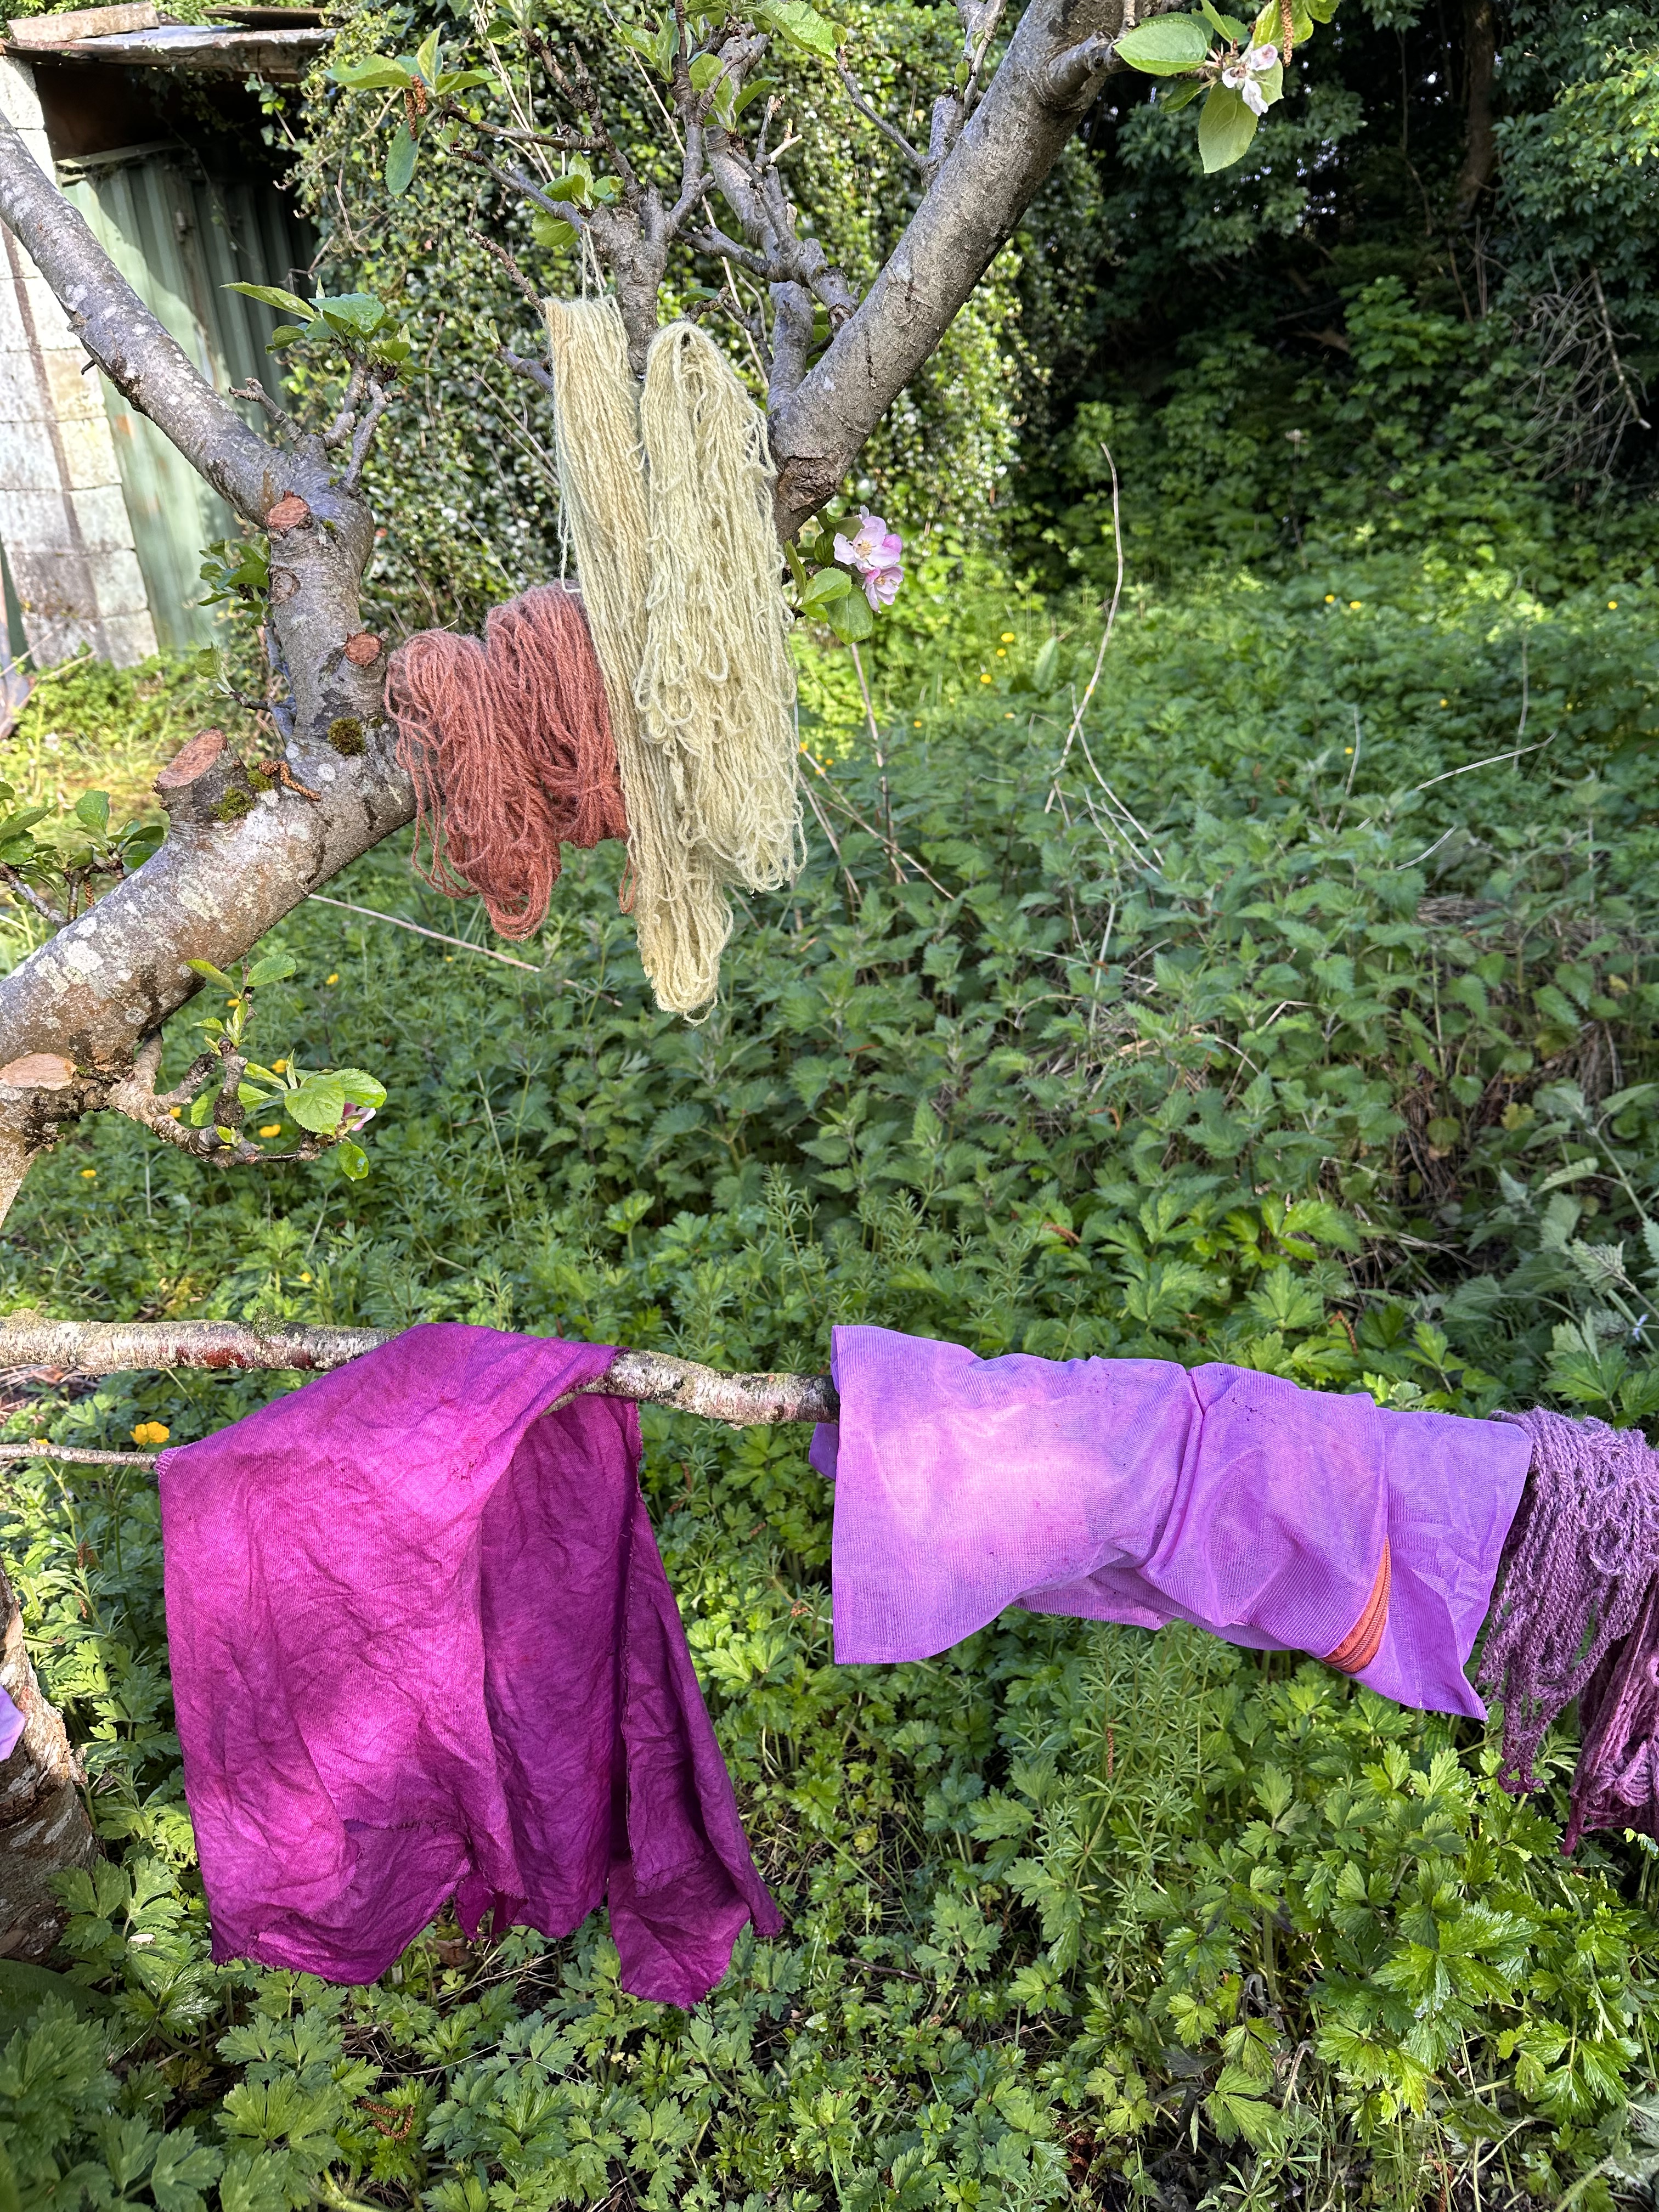 Fabric and yarn are draped in a tree to dry. It is dyed yellow, brown, and pink.